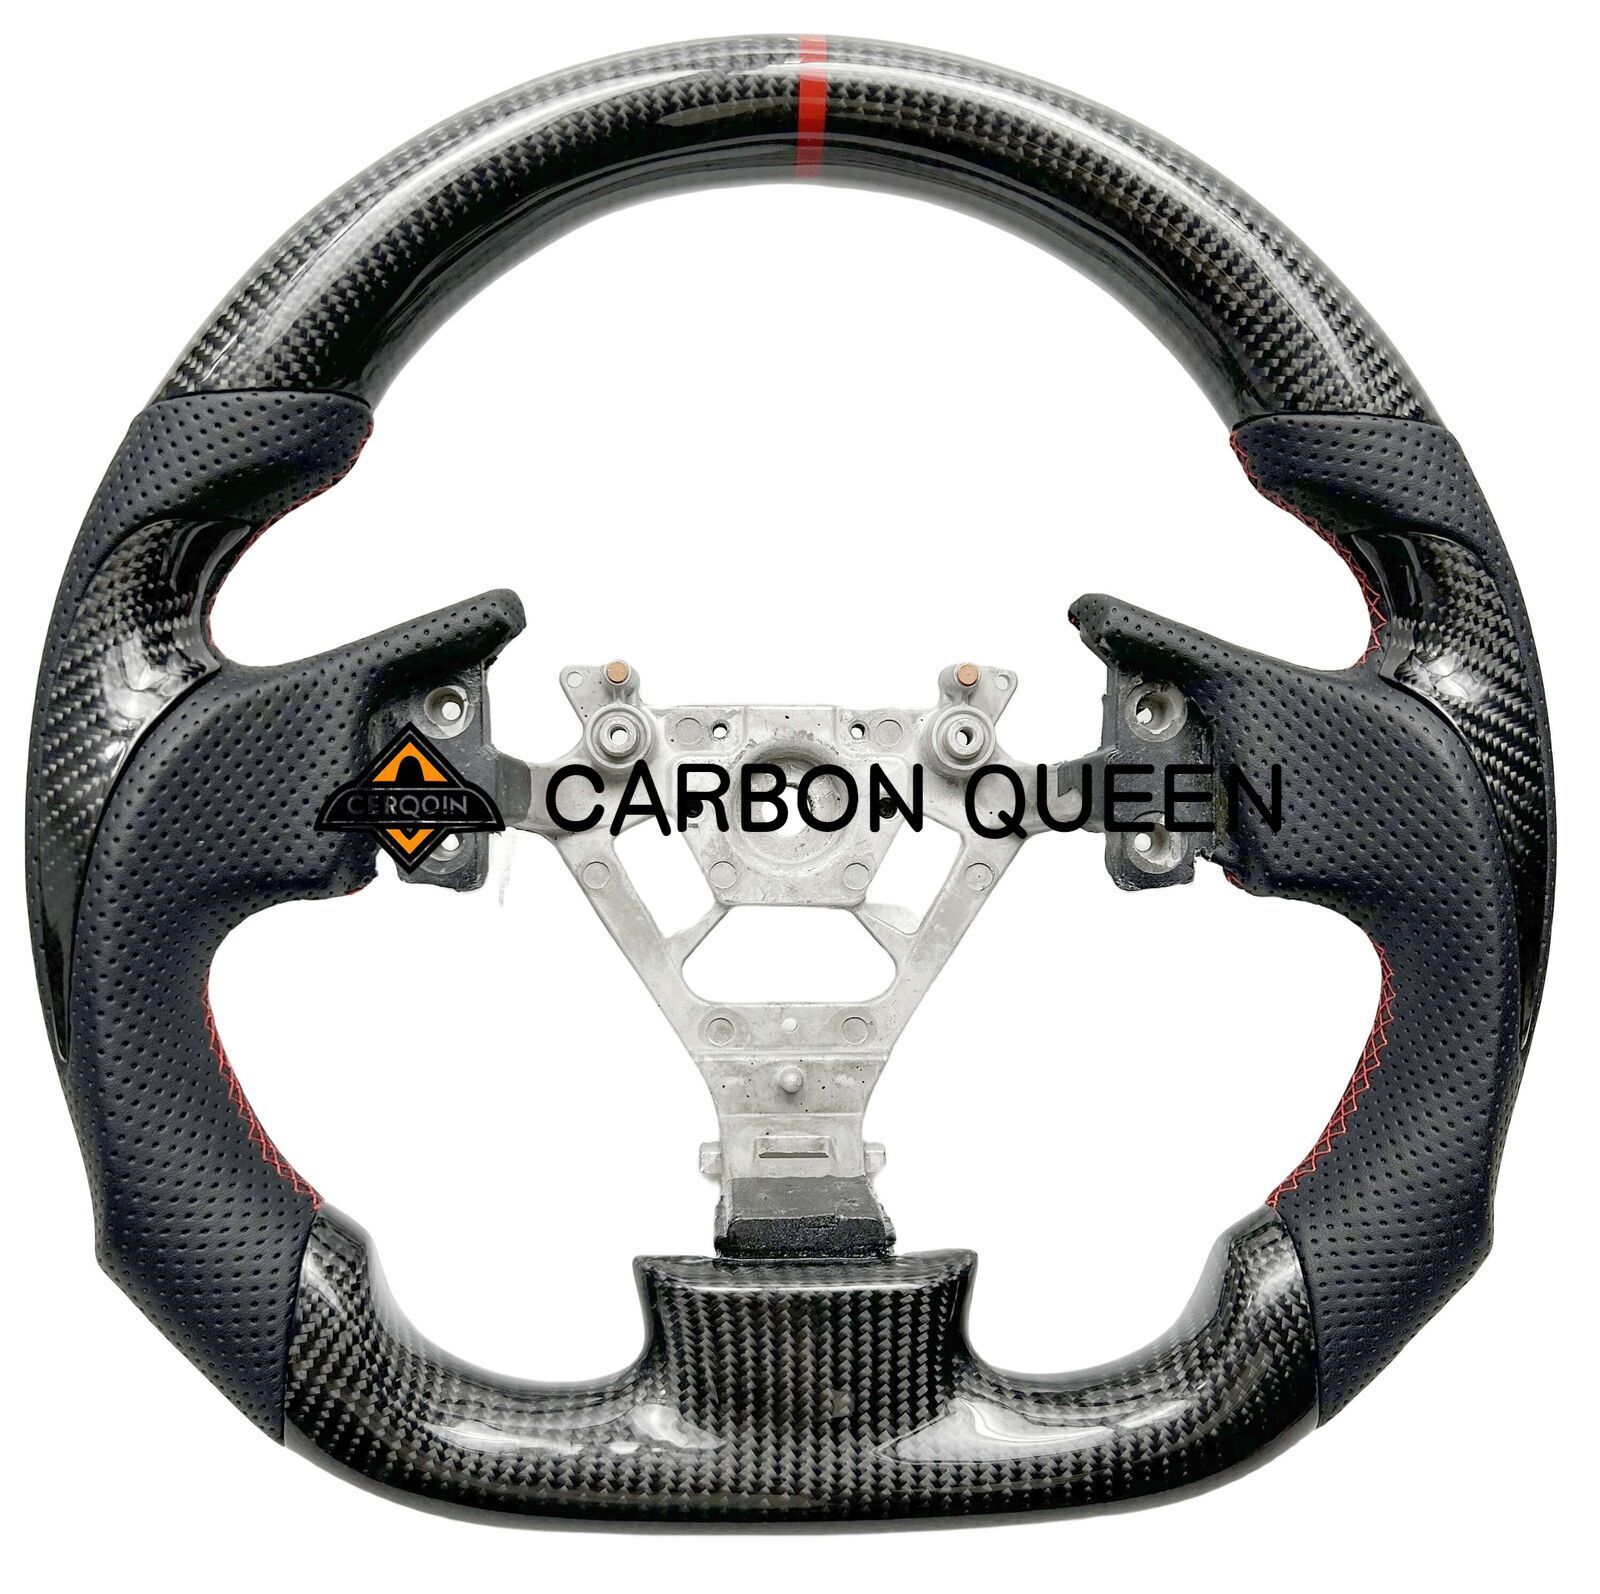 REAL CARBON FIBER Steering Wheel FOR INFINITI g35 W/CARBON THUMBGRIPS 03-08YEARS